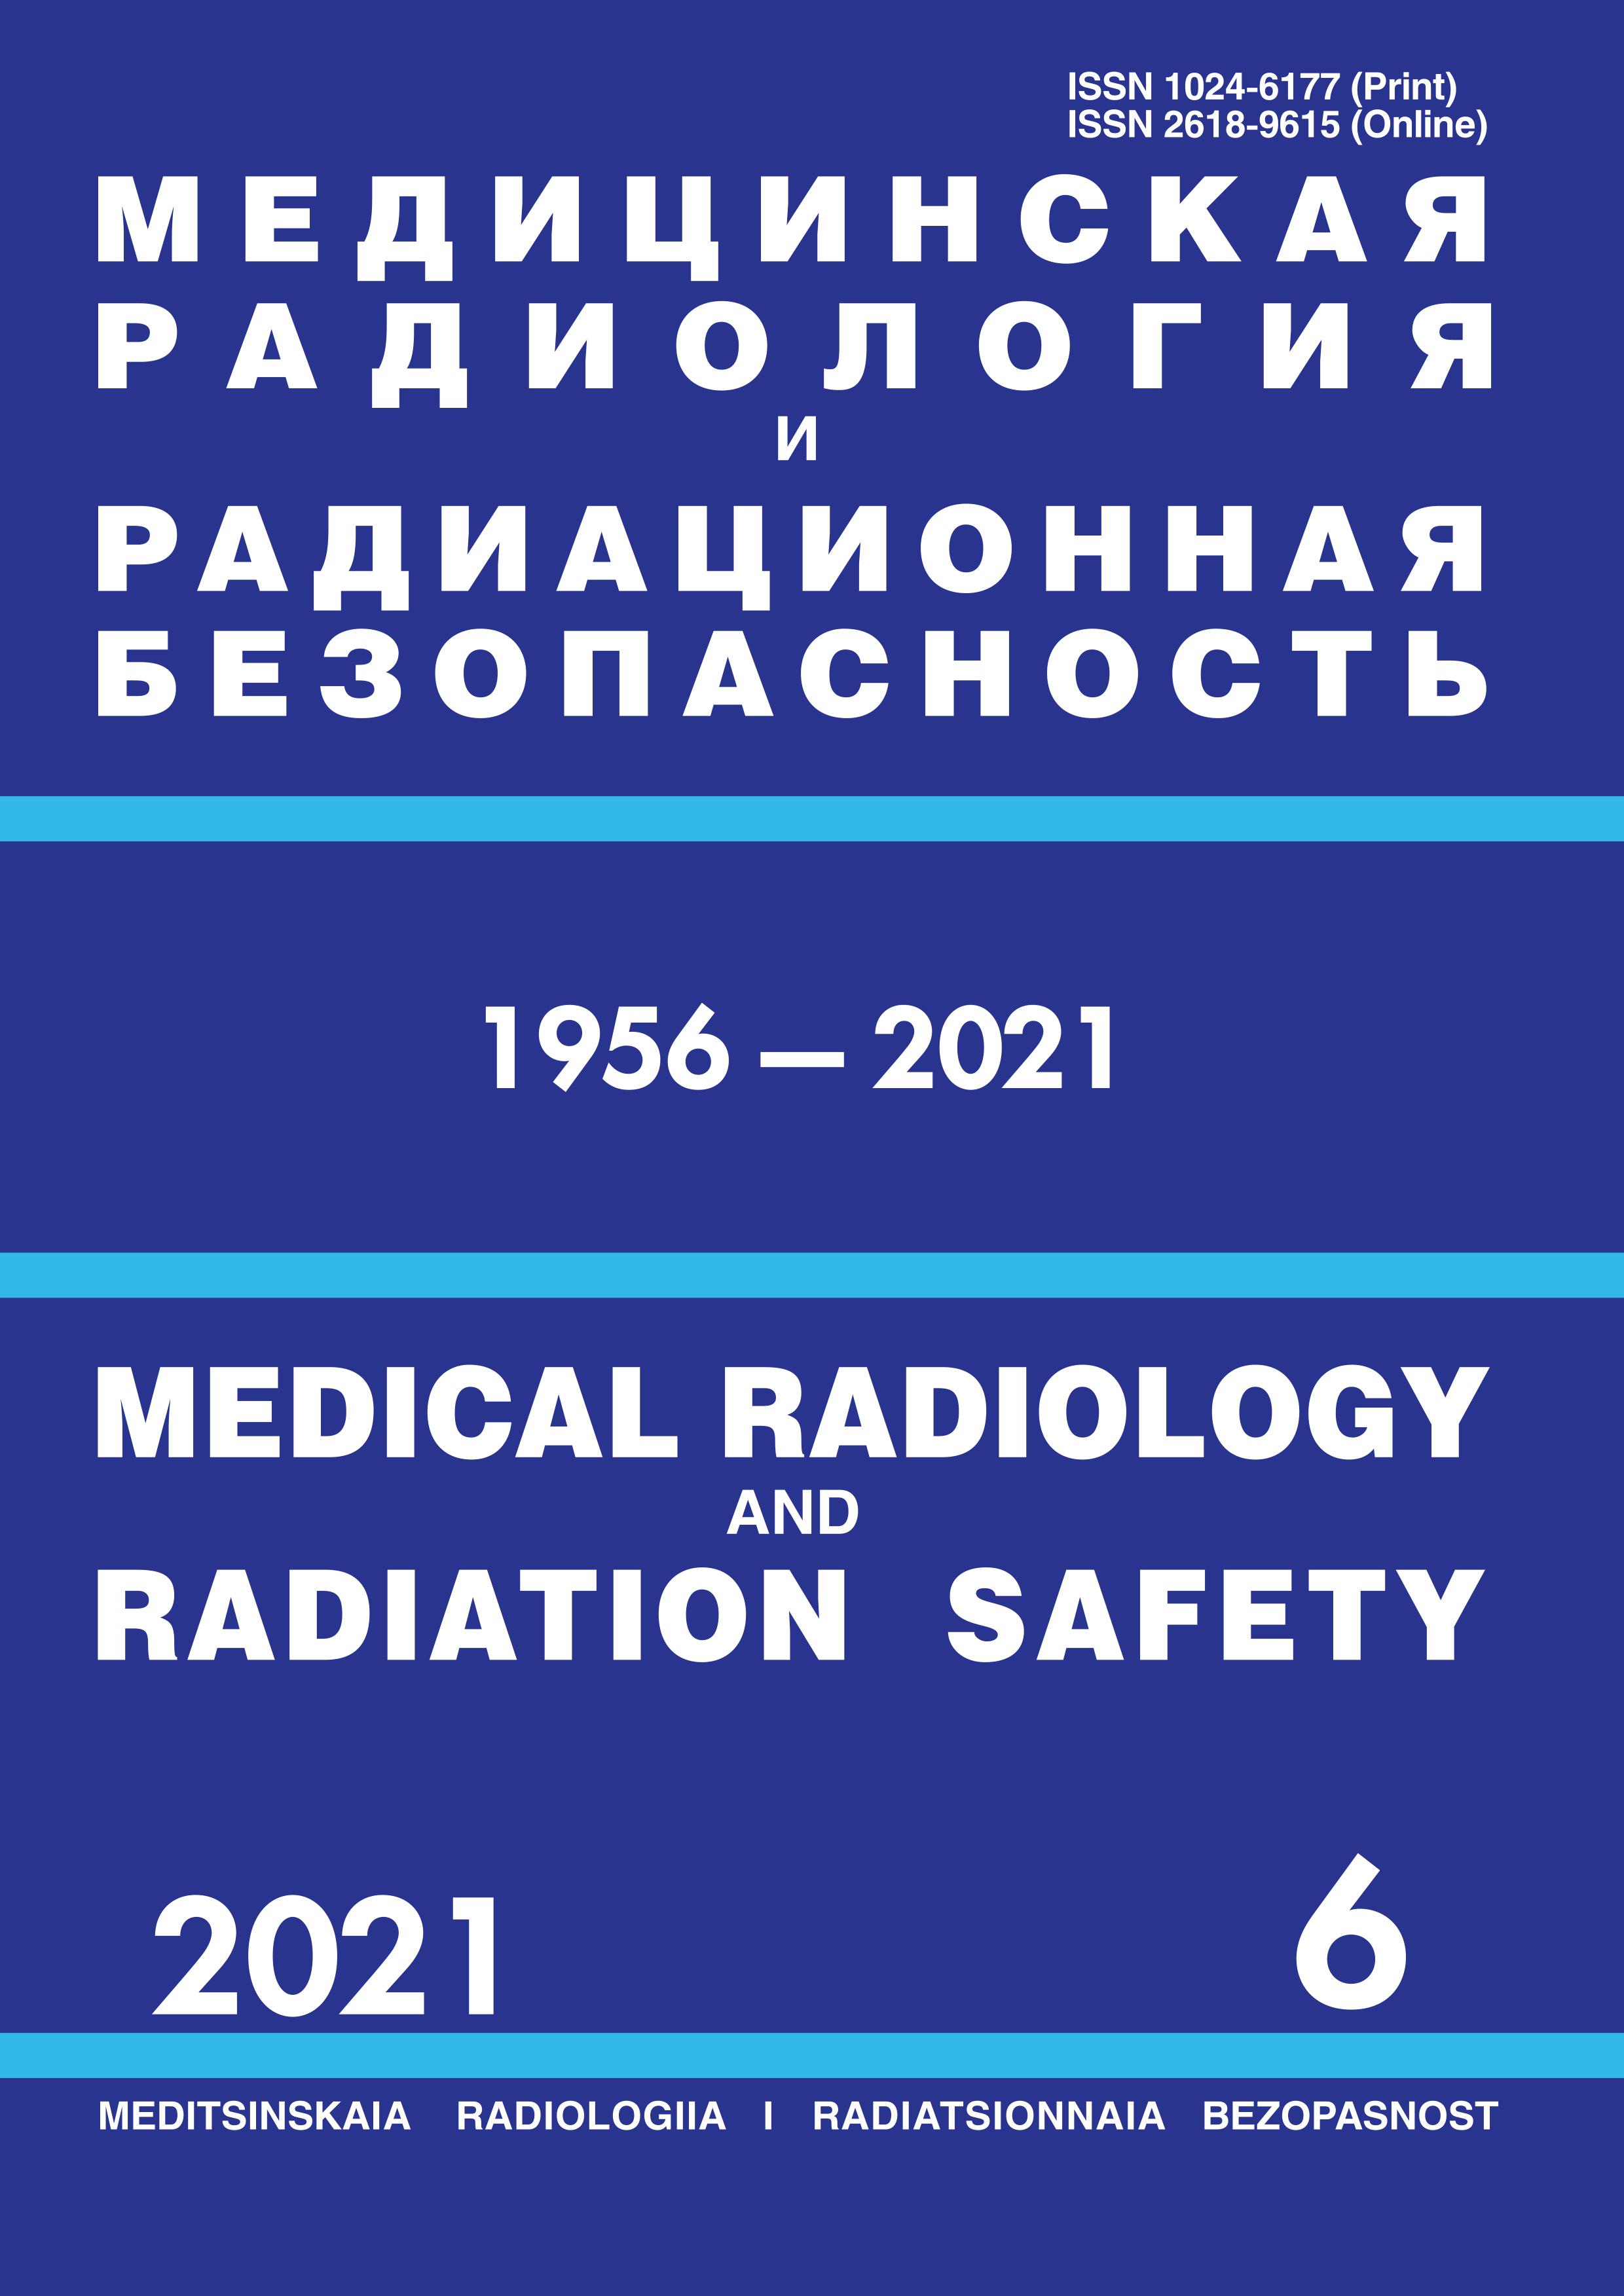                         Medical Radiology and radiation safety
            